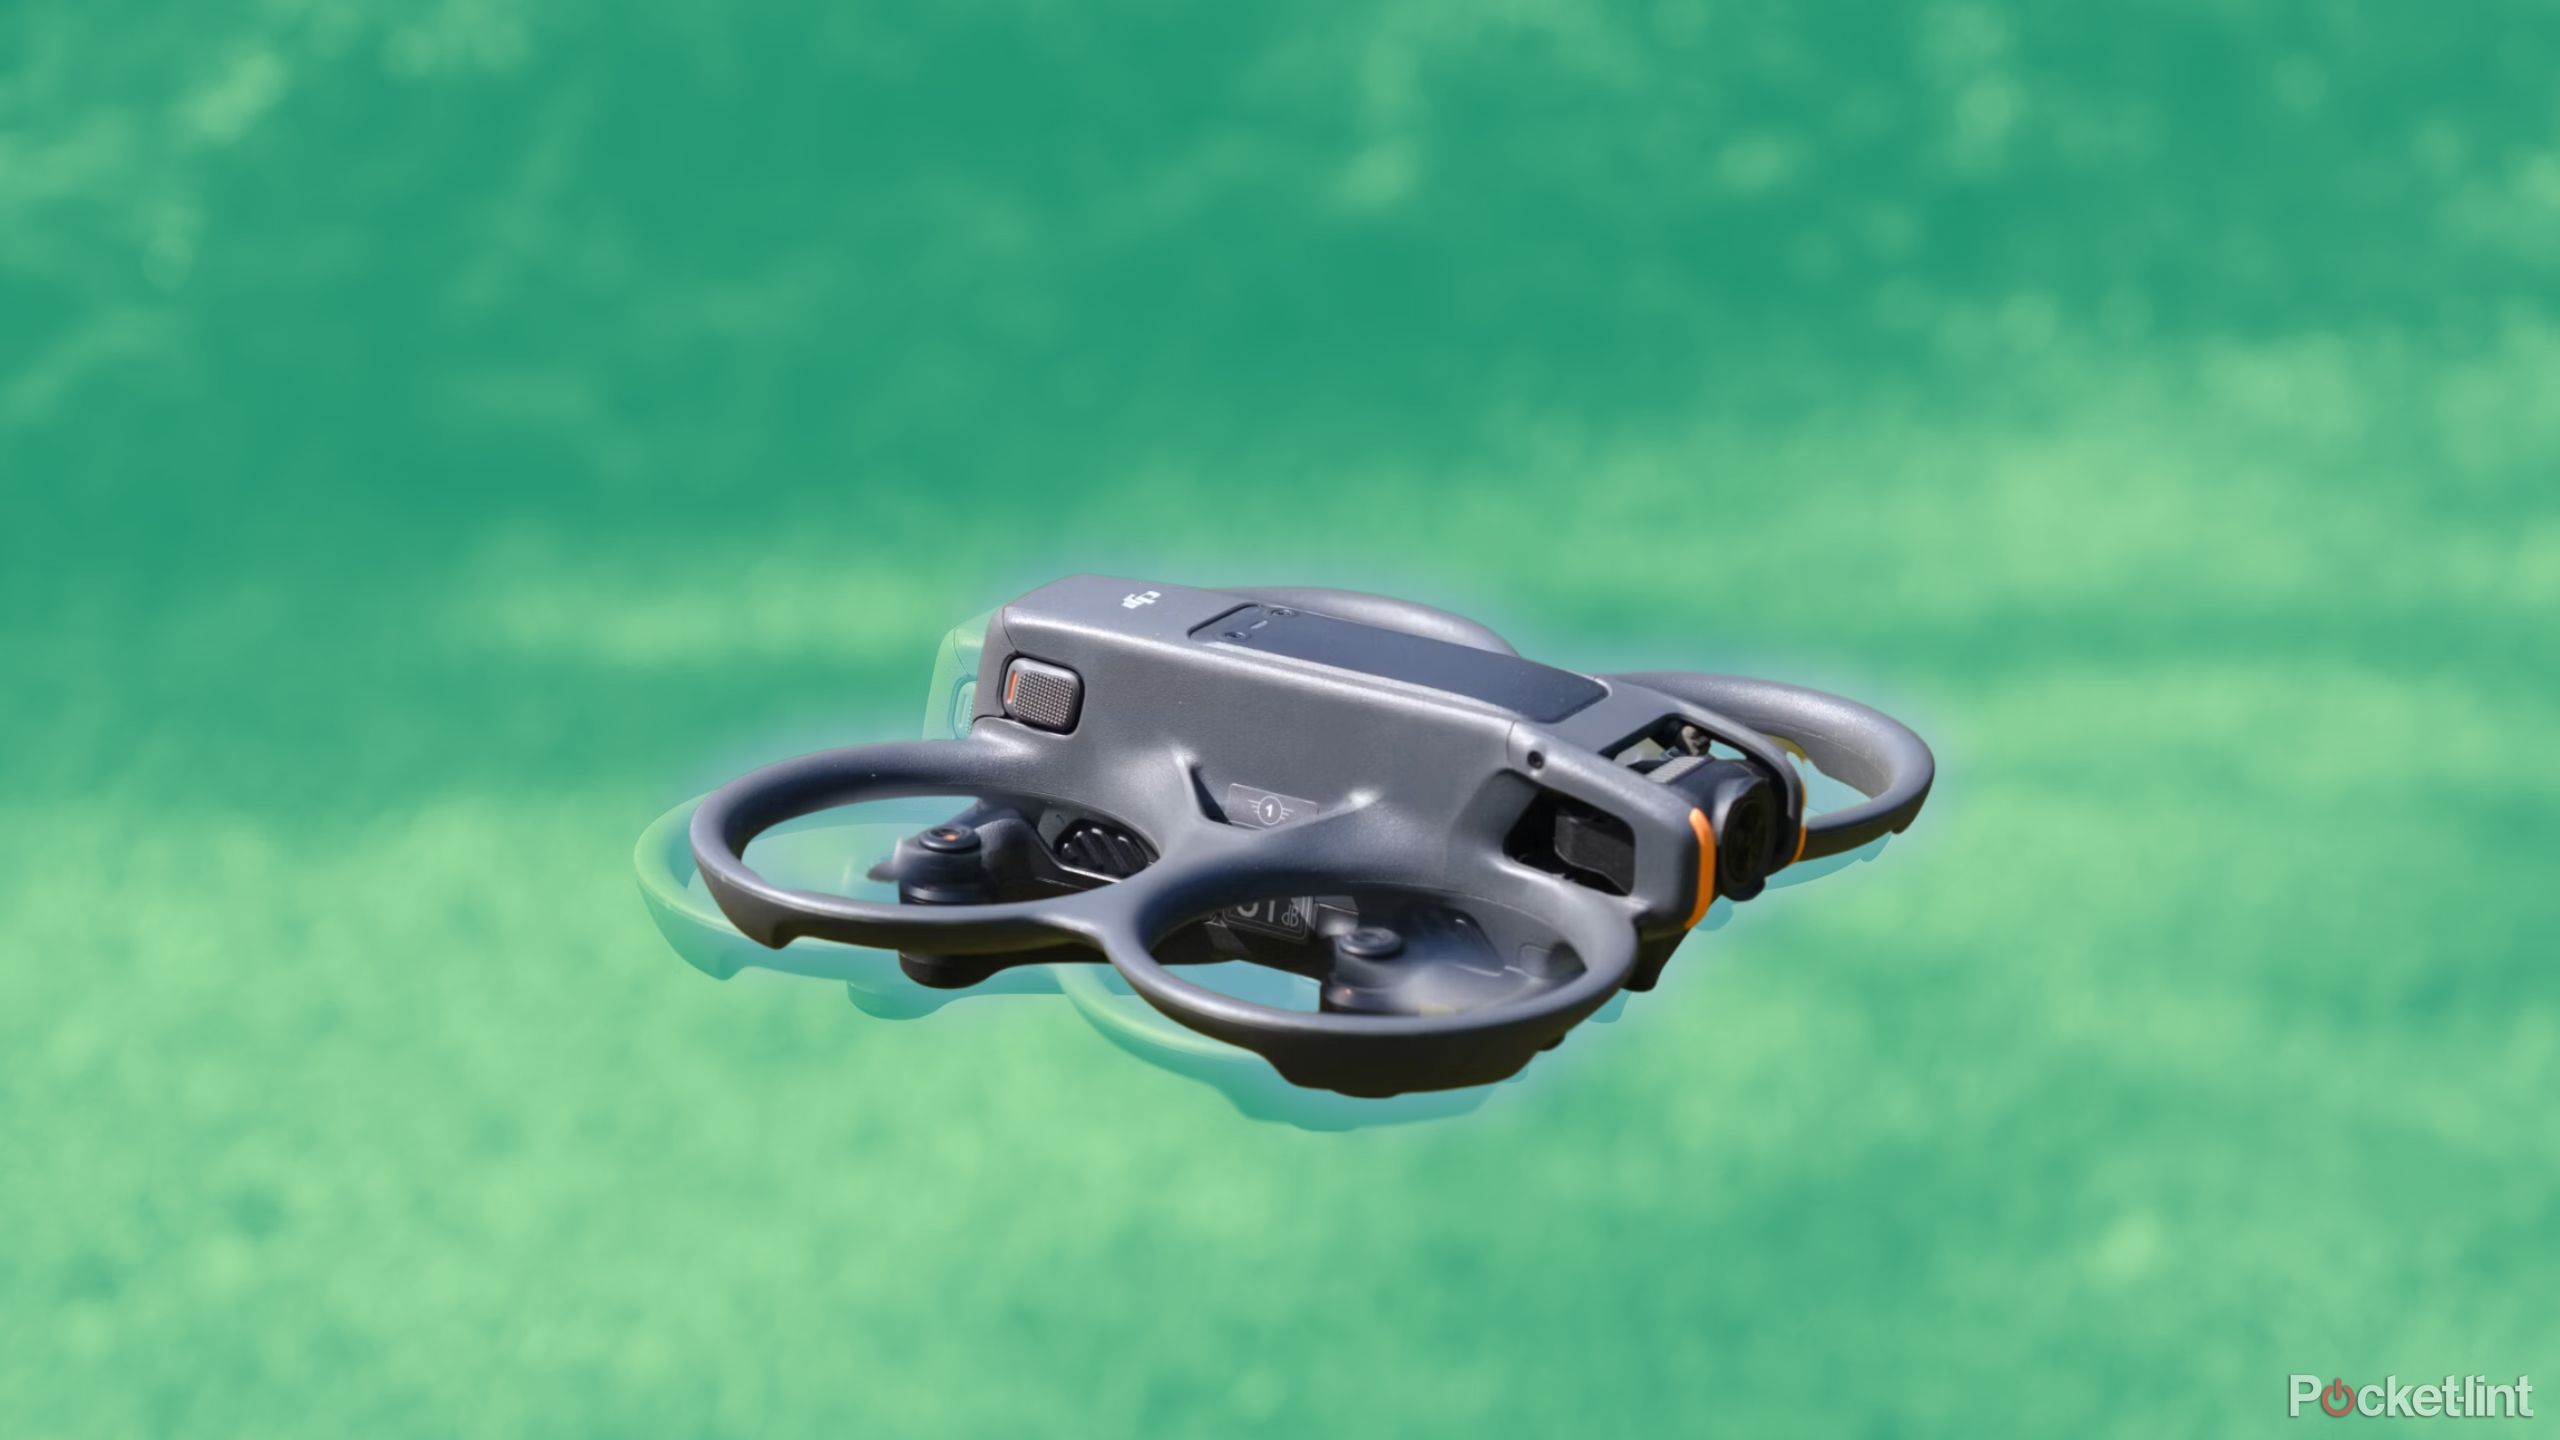 The DJI Avata 2 in flight against a green background